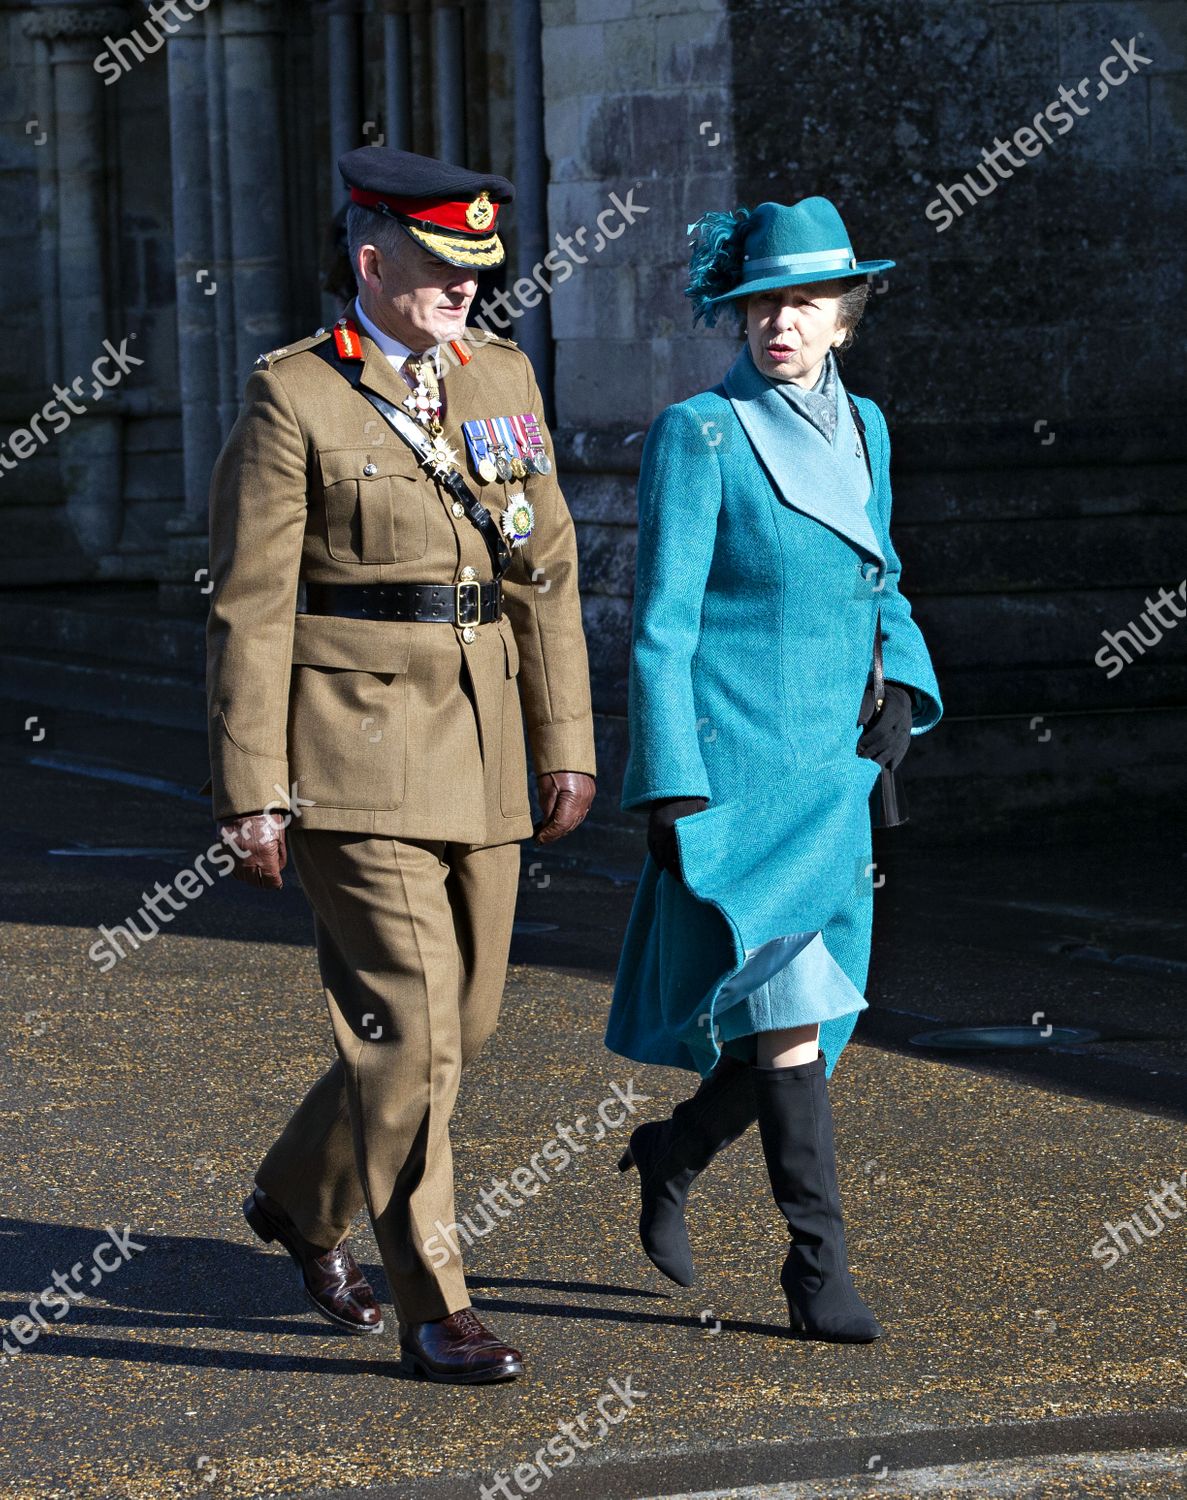 princess-anne-attends-the-royal-corps-of-signals-centenary-service-salisbury-cathedral-wiltshire-uk-shutterstock-editorial-10570519a.jpg